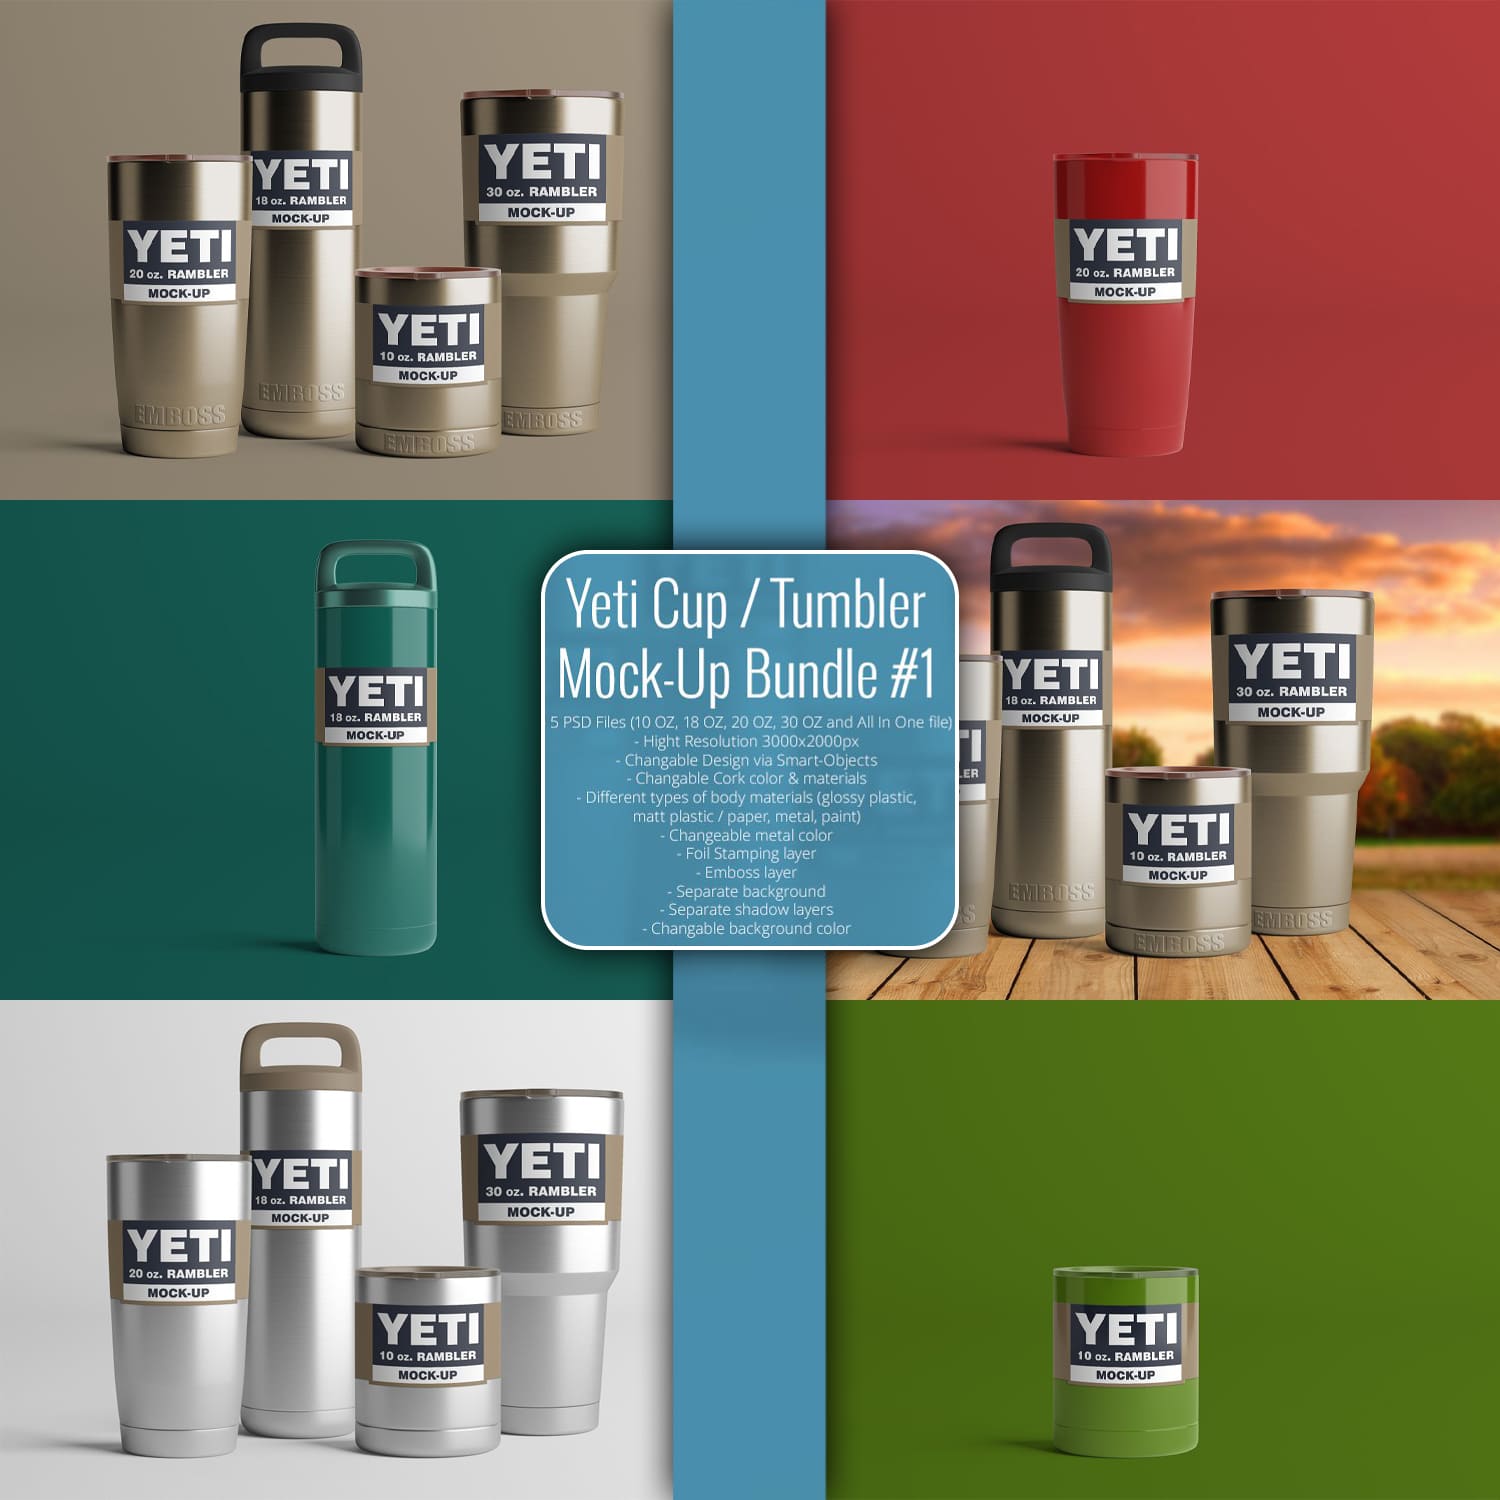 [-50%] Yeti Cup Mock-Up Bundle #1 cover.